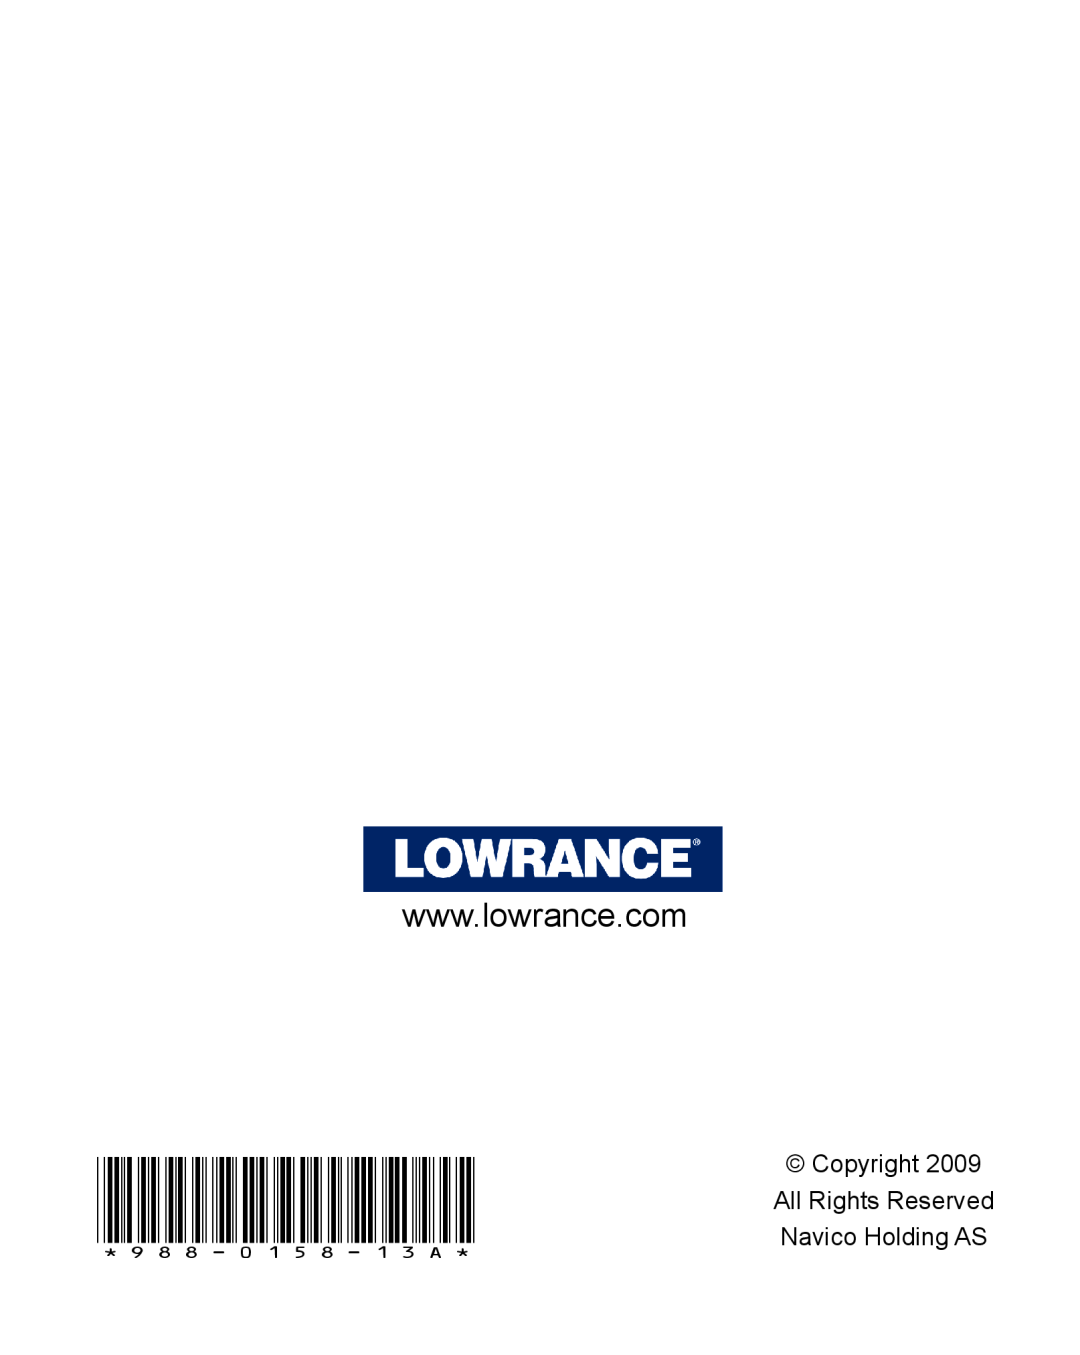 Lowrance electronic LWX-1 installation instructions Copyright 988-0158-13A*All Rights Reserved, Navico Holding AS 